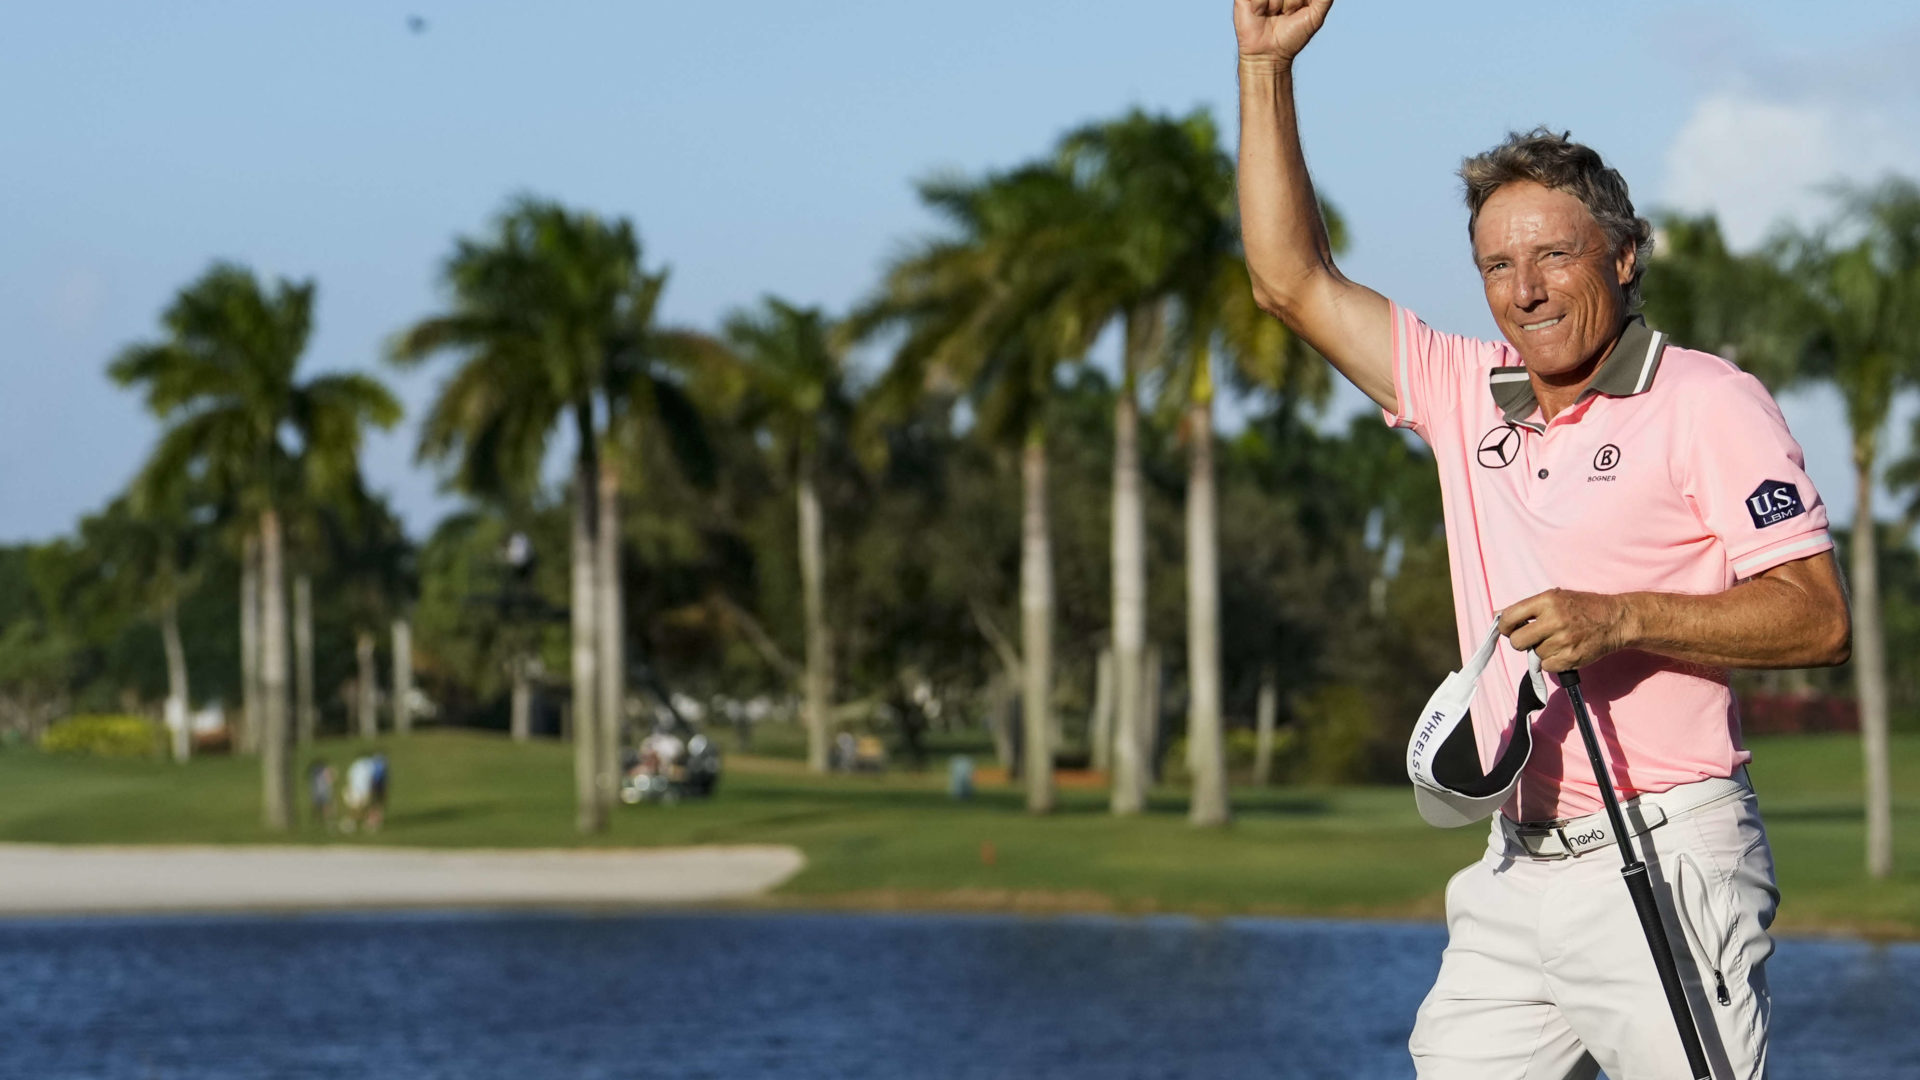 BOCA RATON, FLORIDA - NOVEMBER 06: Bernhard Langer of Germany celebrates on the 18th green during the final round of the TimberTech Championship at Royal Palm Yacht & Country Club on November 06, 2022 in Boca Raton, Florida. tour news (Photo by Raj Mehta/Getty Images)